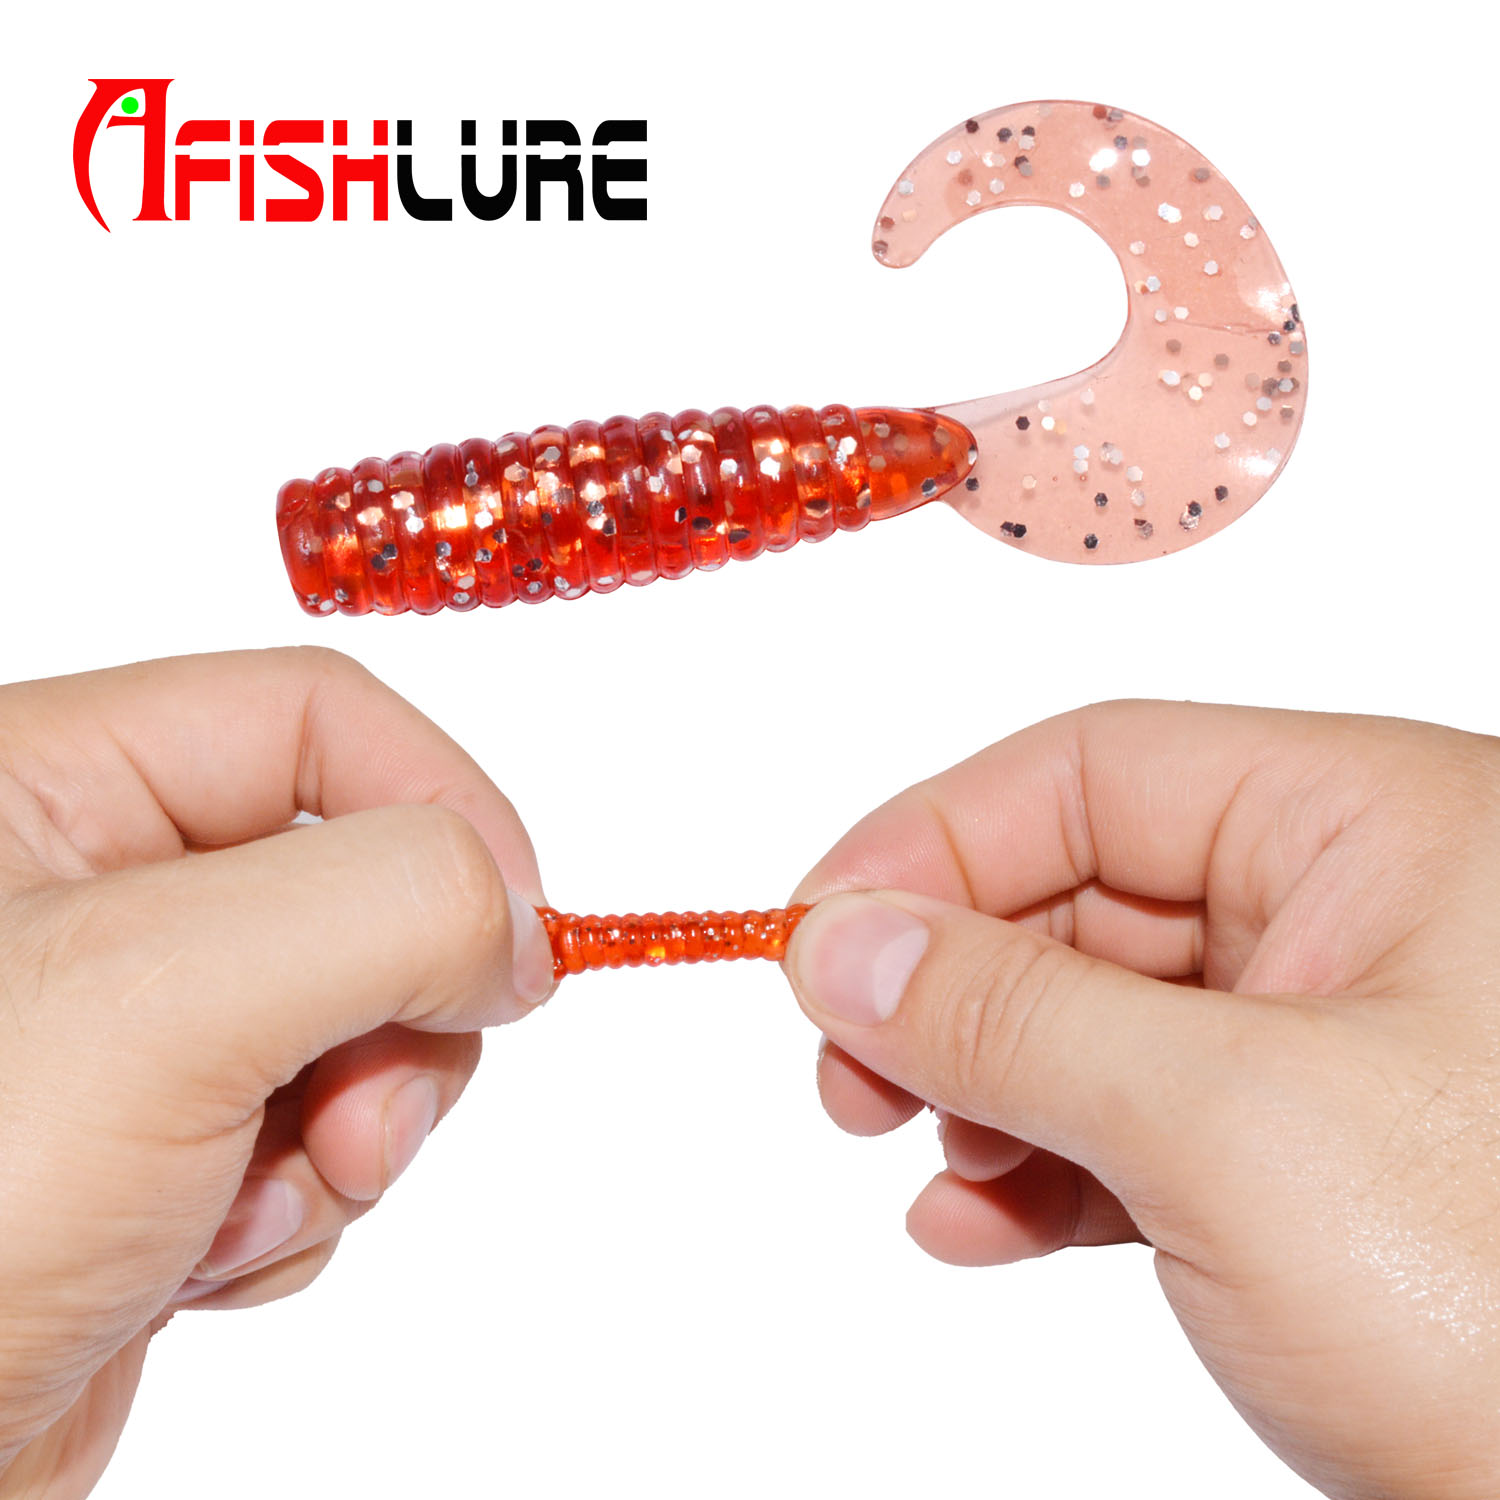 Curly Tail Soft Lure